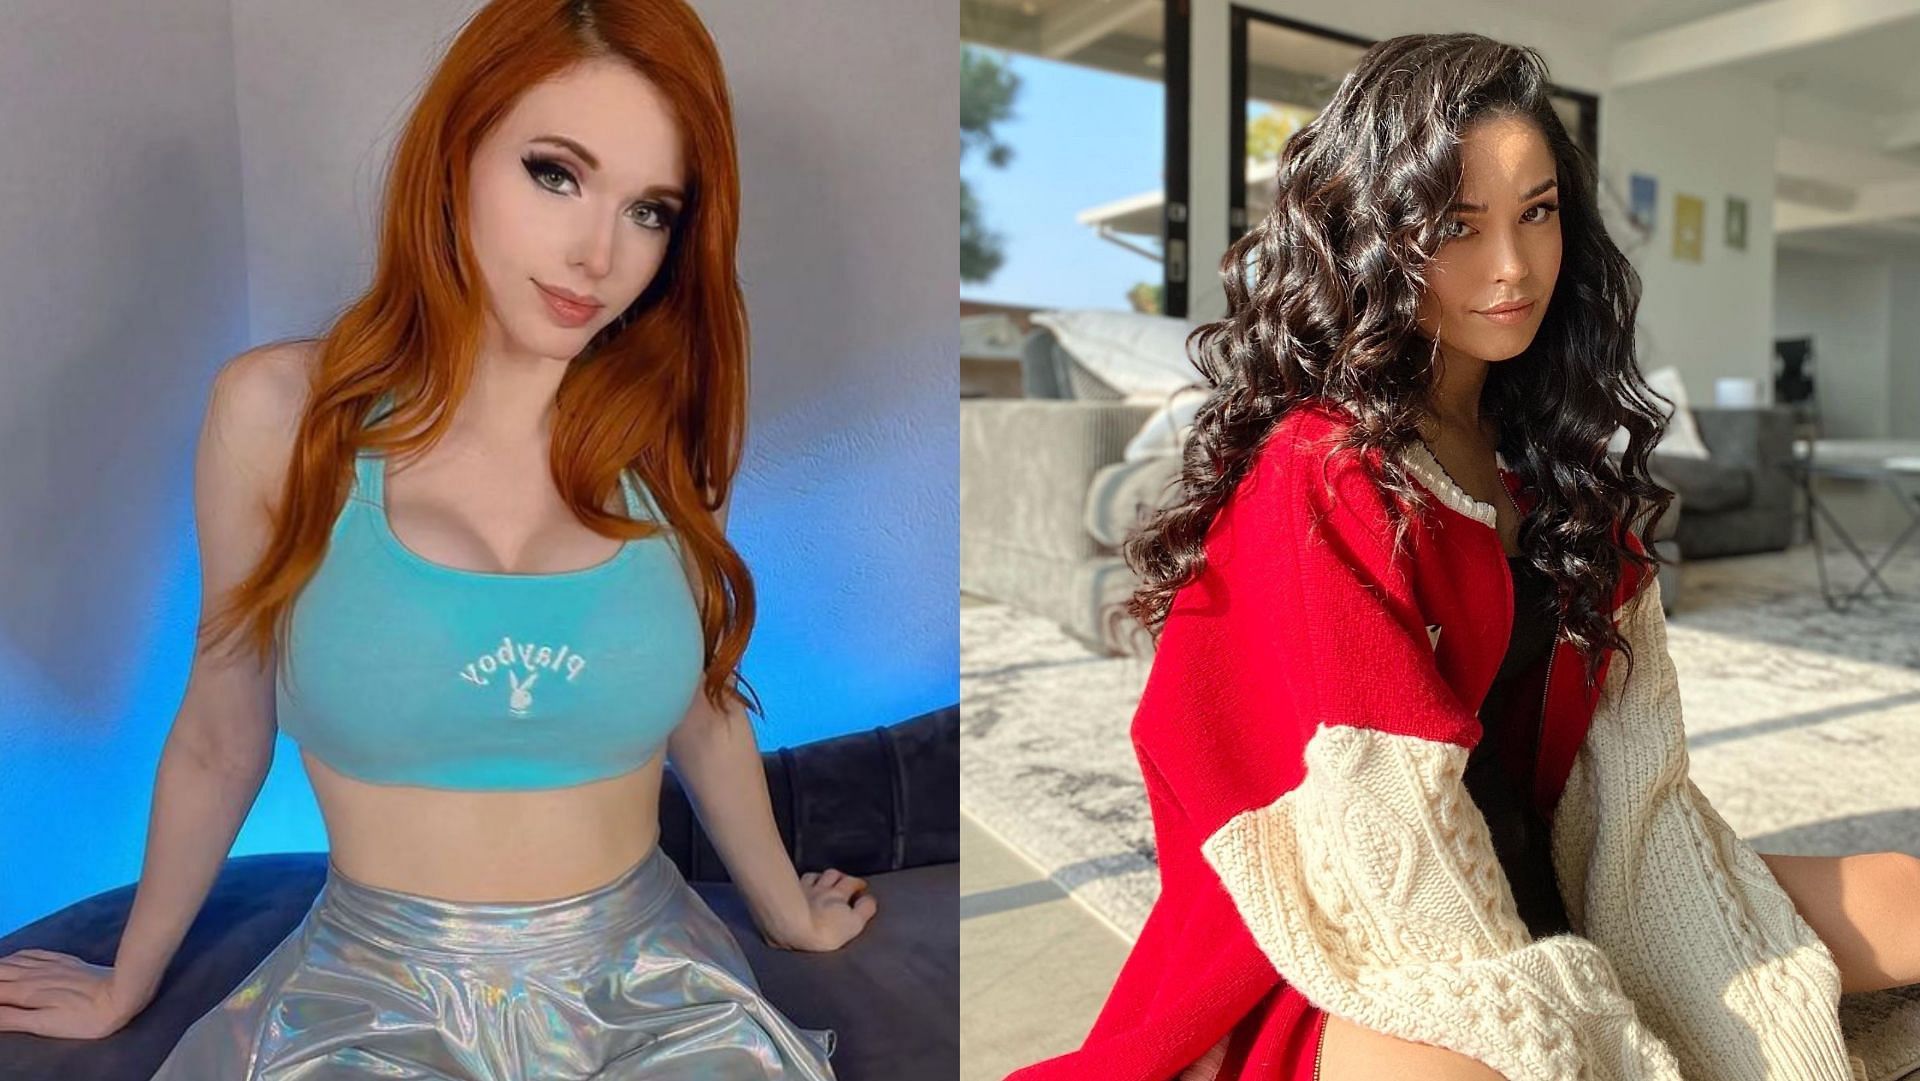 Valkyrae expresses concern for Amouranth&rsquo;s wellbeing (Image via Amouranth, Valkyrae/Instagram)